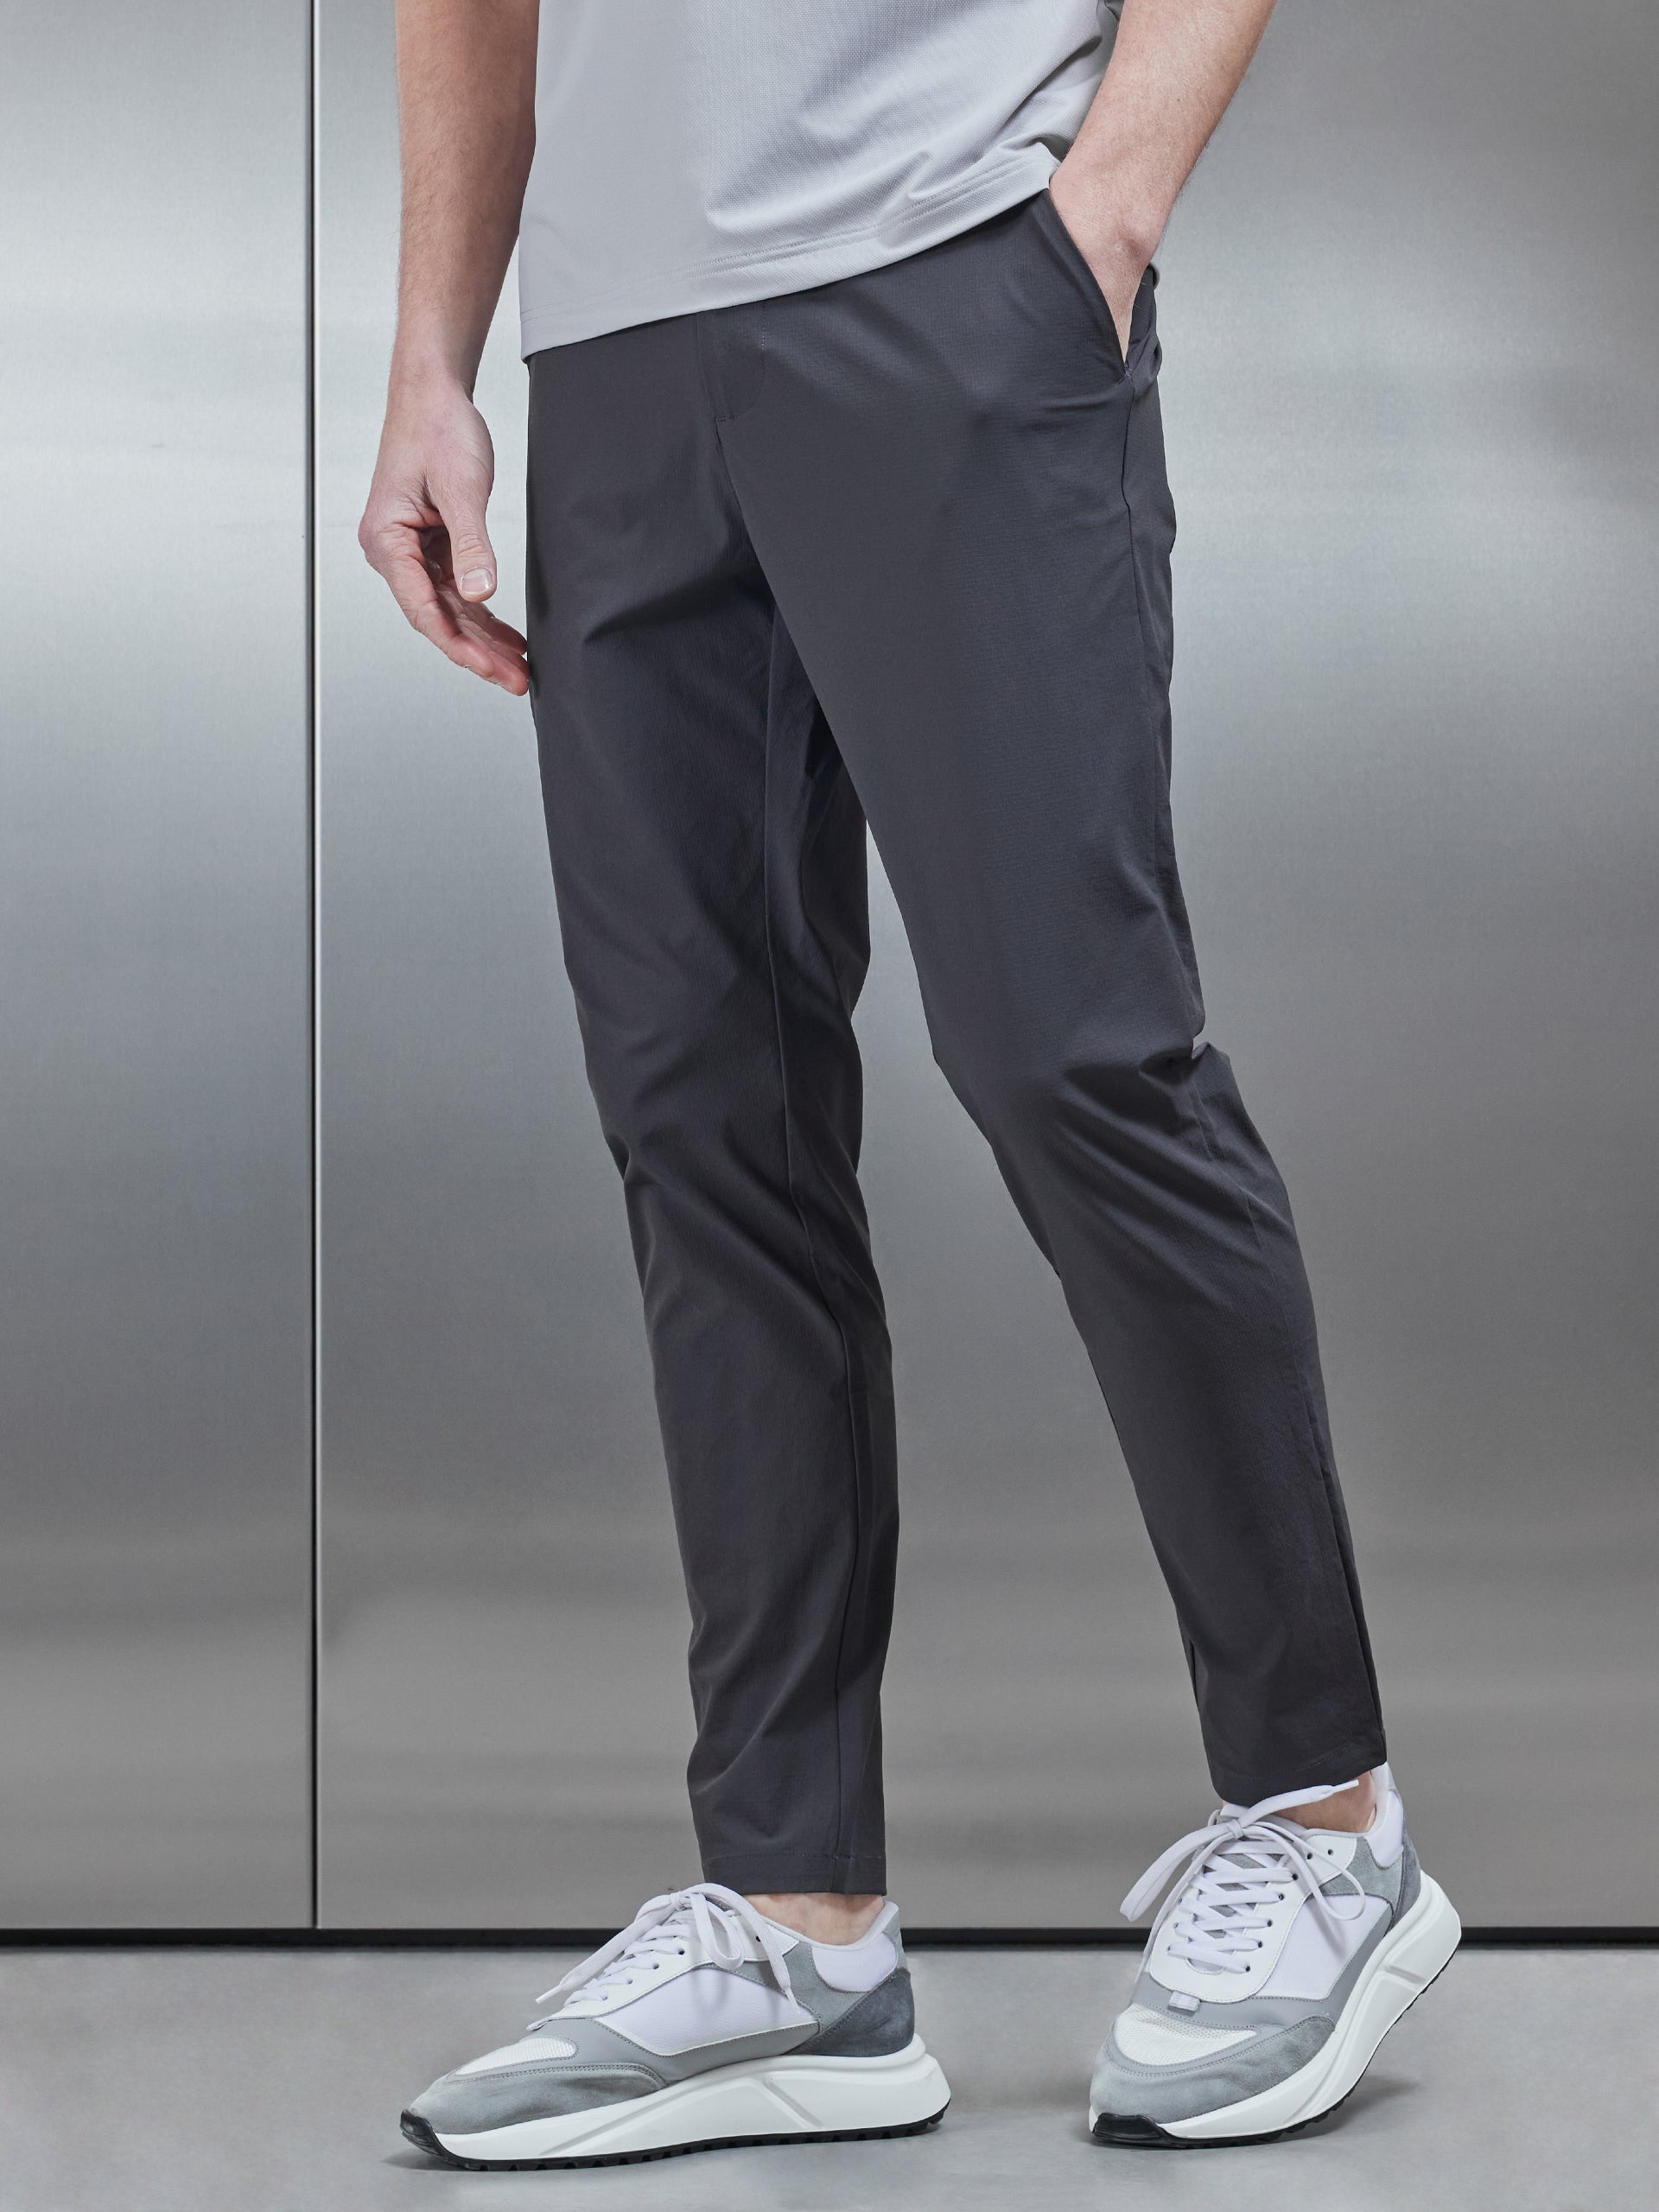 Buy Arrow Hudson Tailored Fit Tailored Formal Trousers - NNNOW.com